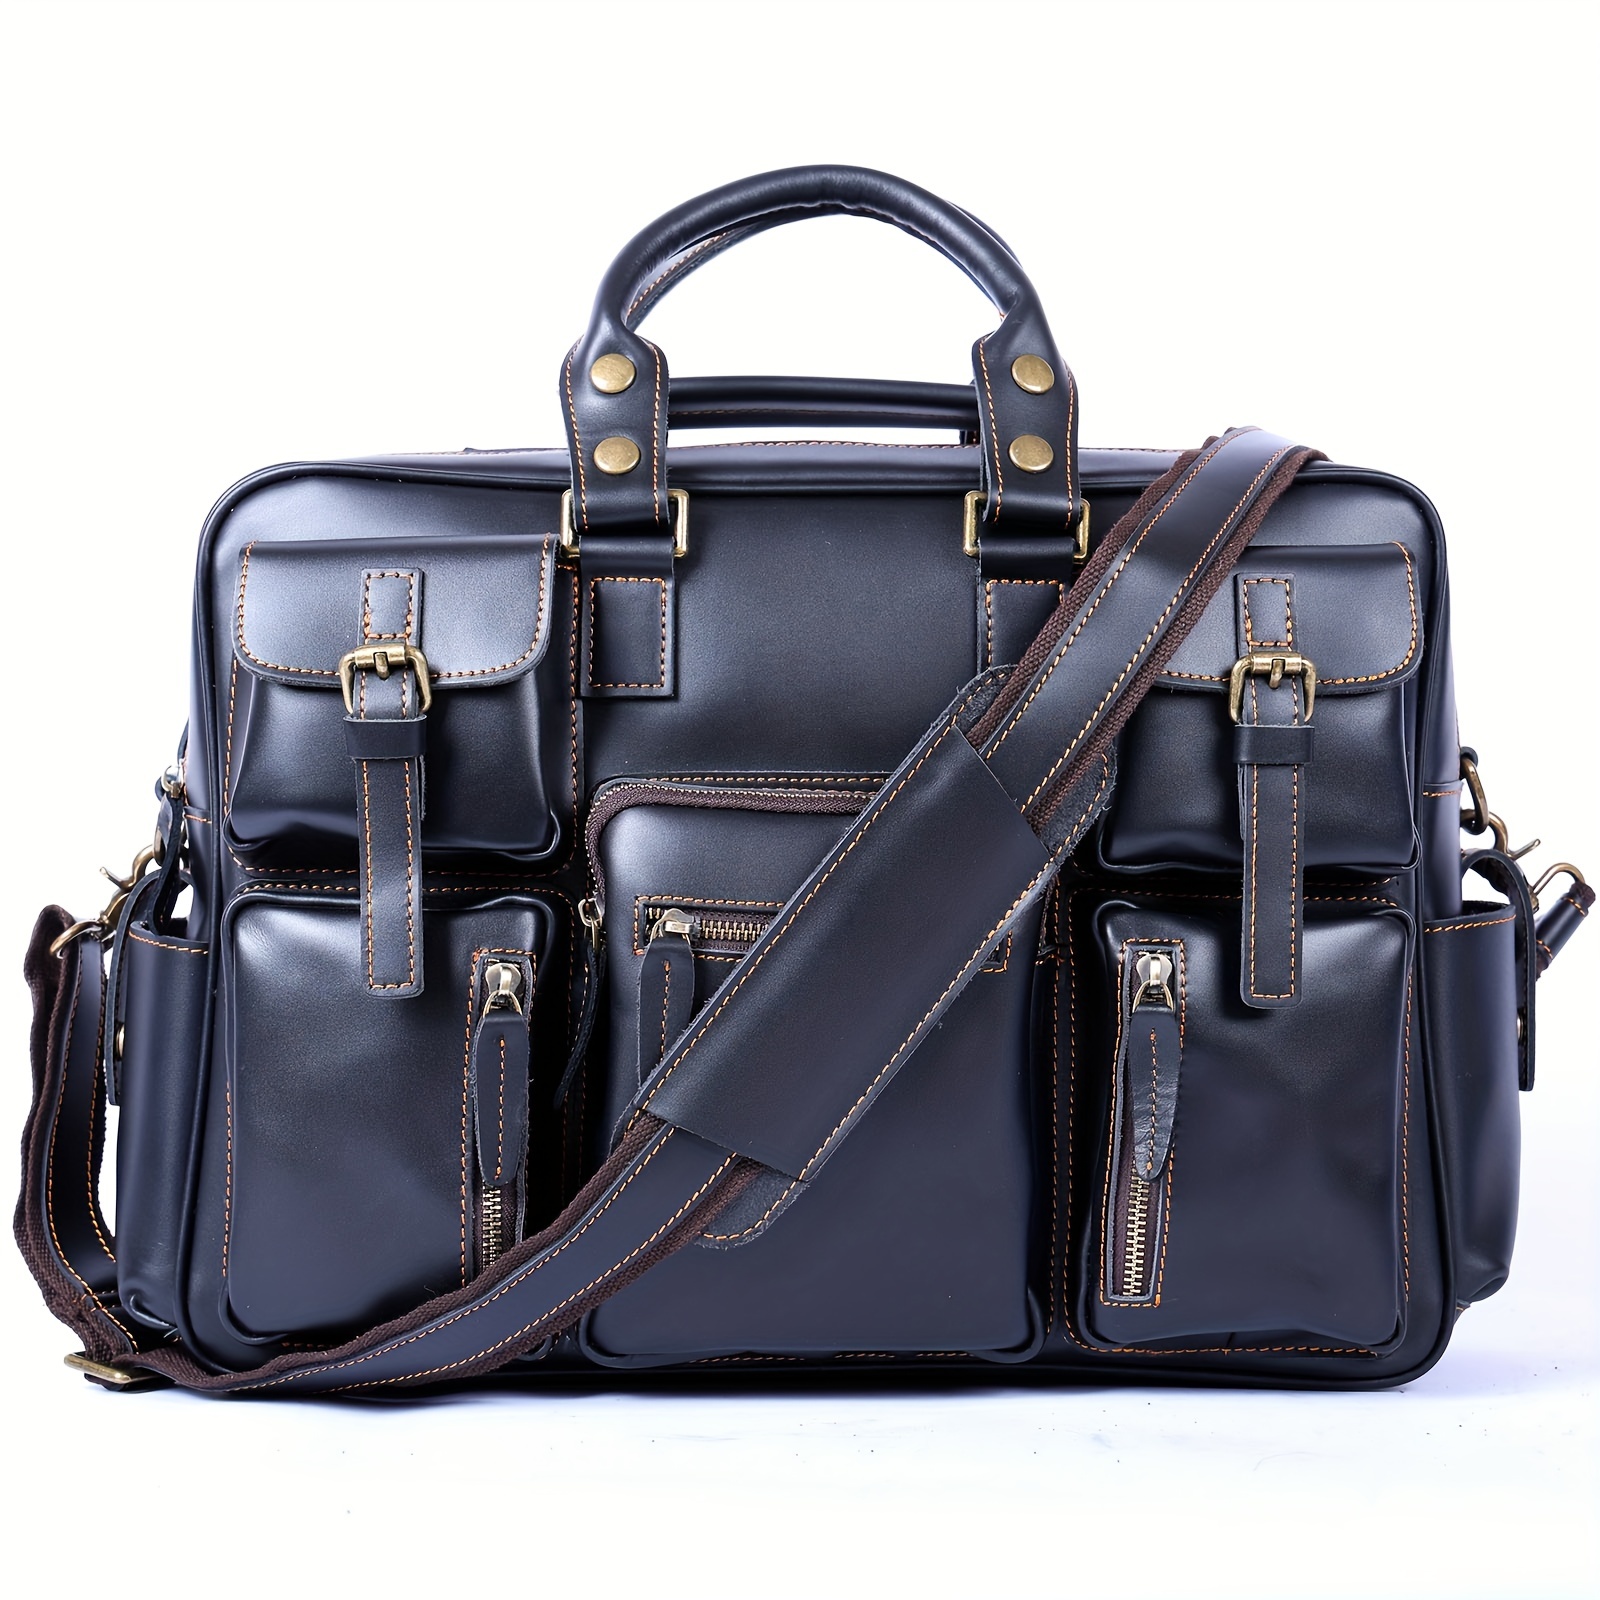 1pc Vintage Crossbody Briefcase Bag With Multiple Compartments & Laptop Sleeve For Business Trips & Traveling, Work Bags For Men\\u002FWomen,